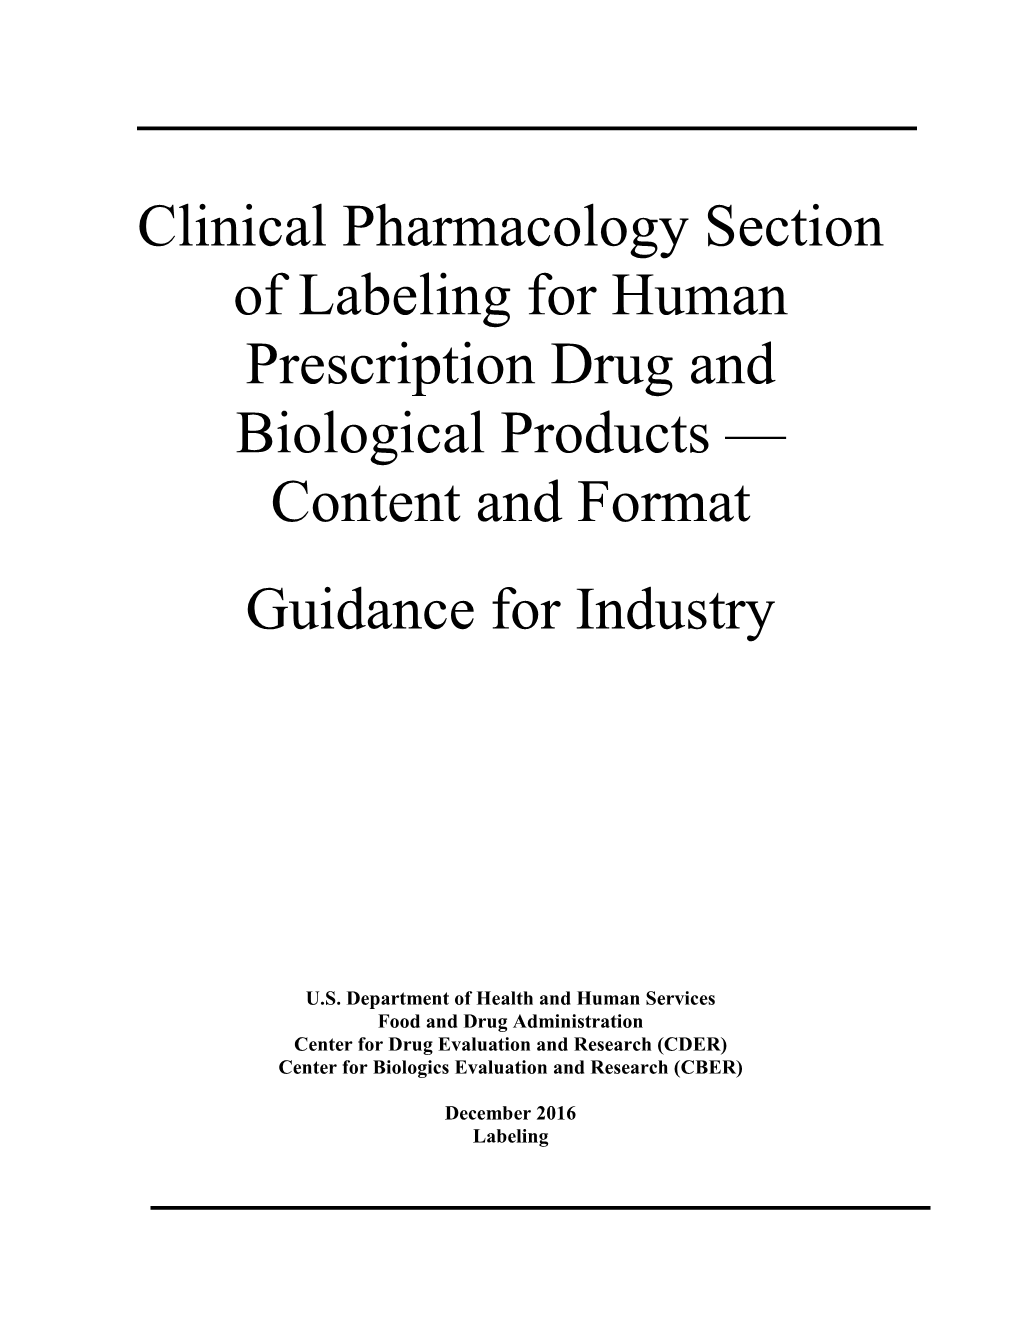 Clinical Pharmacology Section of Labeling for Human Prescription Drug and Biological Products — Content and Format